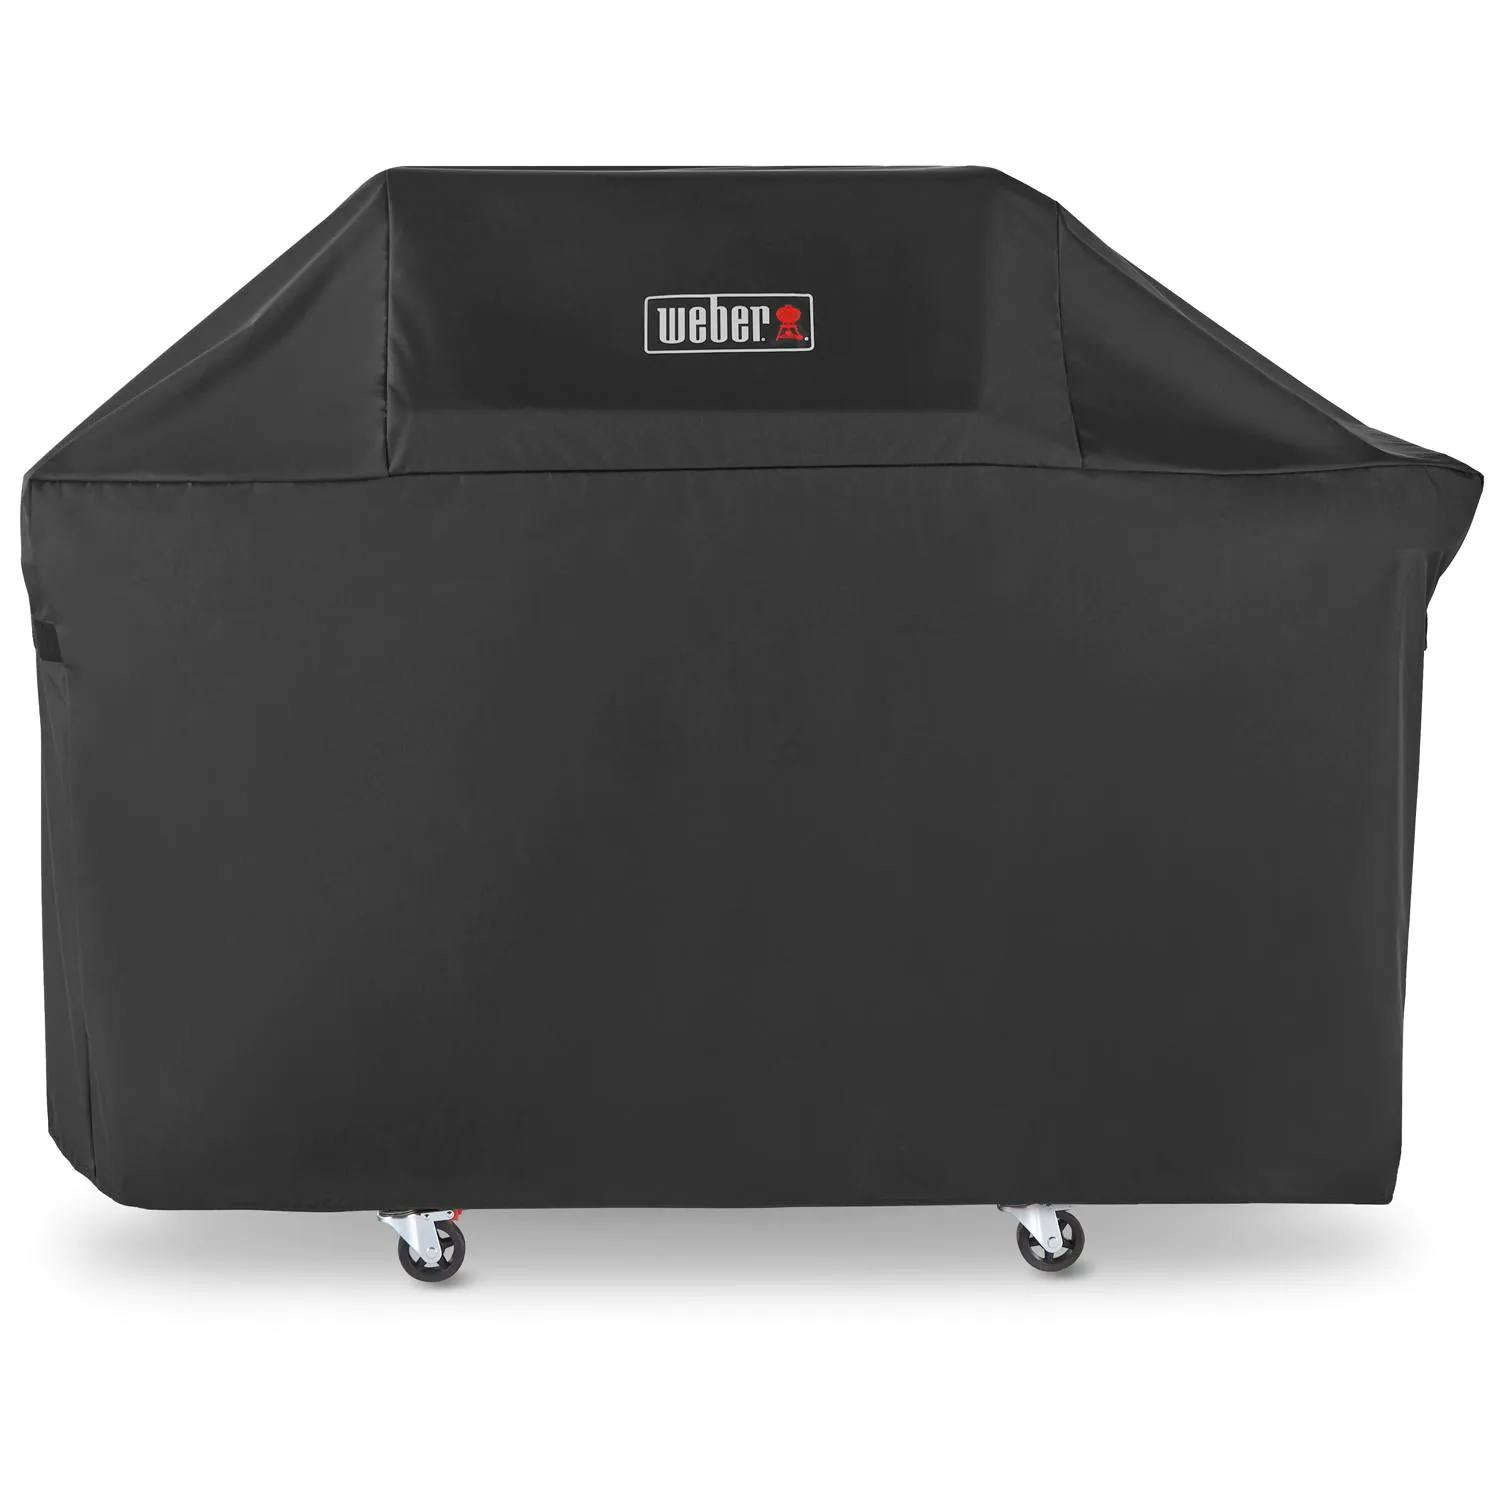 Weber NEW GENESIS Premium Grill Cover For NEW GENESIS 300 Series Gas Grills · 12 in.